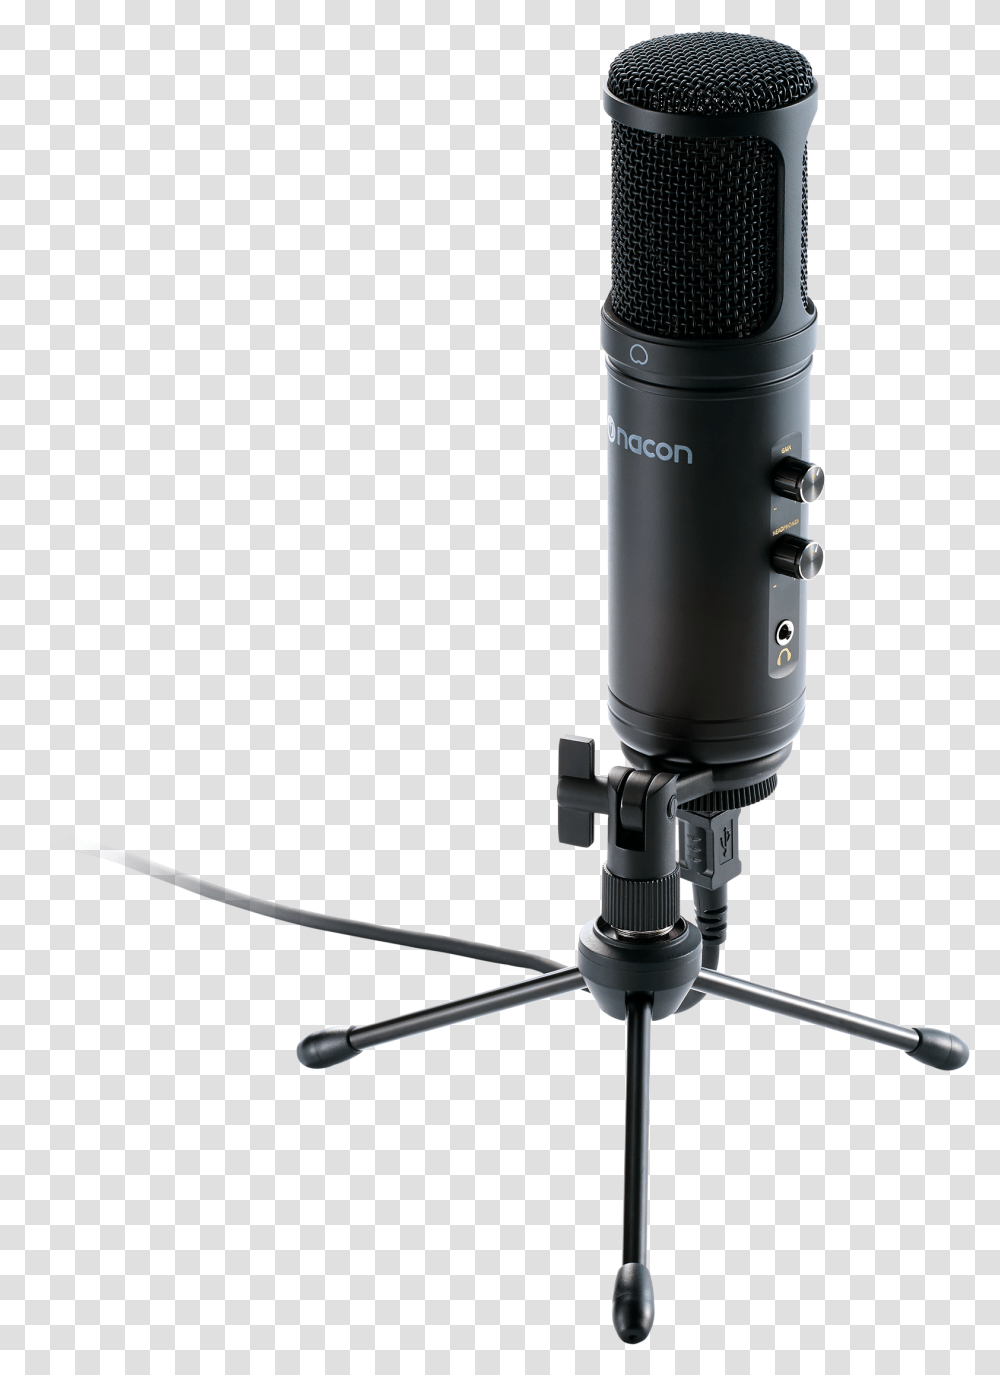 Nacon St 200 Mic, Electrical Device, Tripod, Microphone Transparent Png